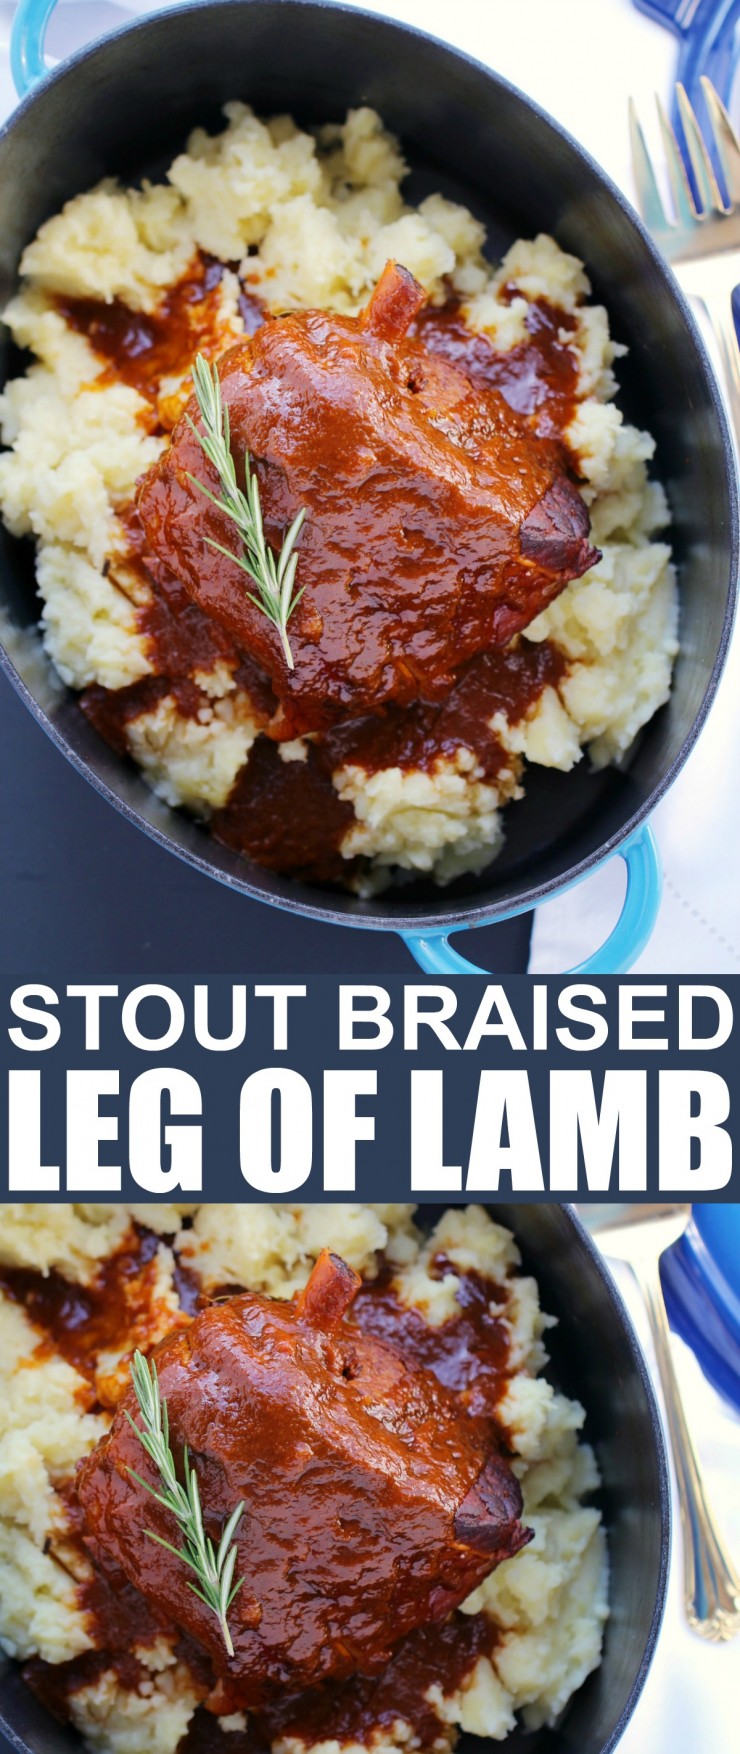 This Stout Braised Leg of Lamb is tender and flavourful - a Sunday family dinner worthy of a dinner party. The lamb is slowly braised over 4 hours in a sauce made with stout that imparts a deep rich flavour to the falling-off-the-bone-tender lamb.